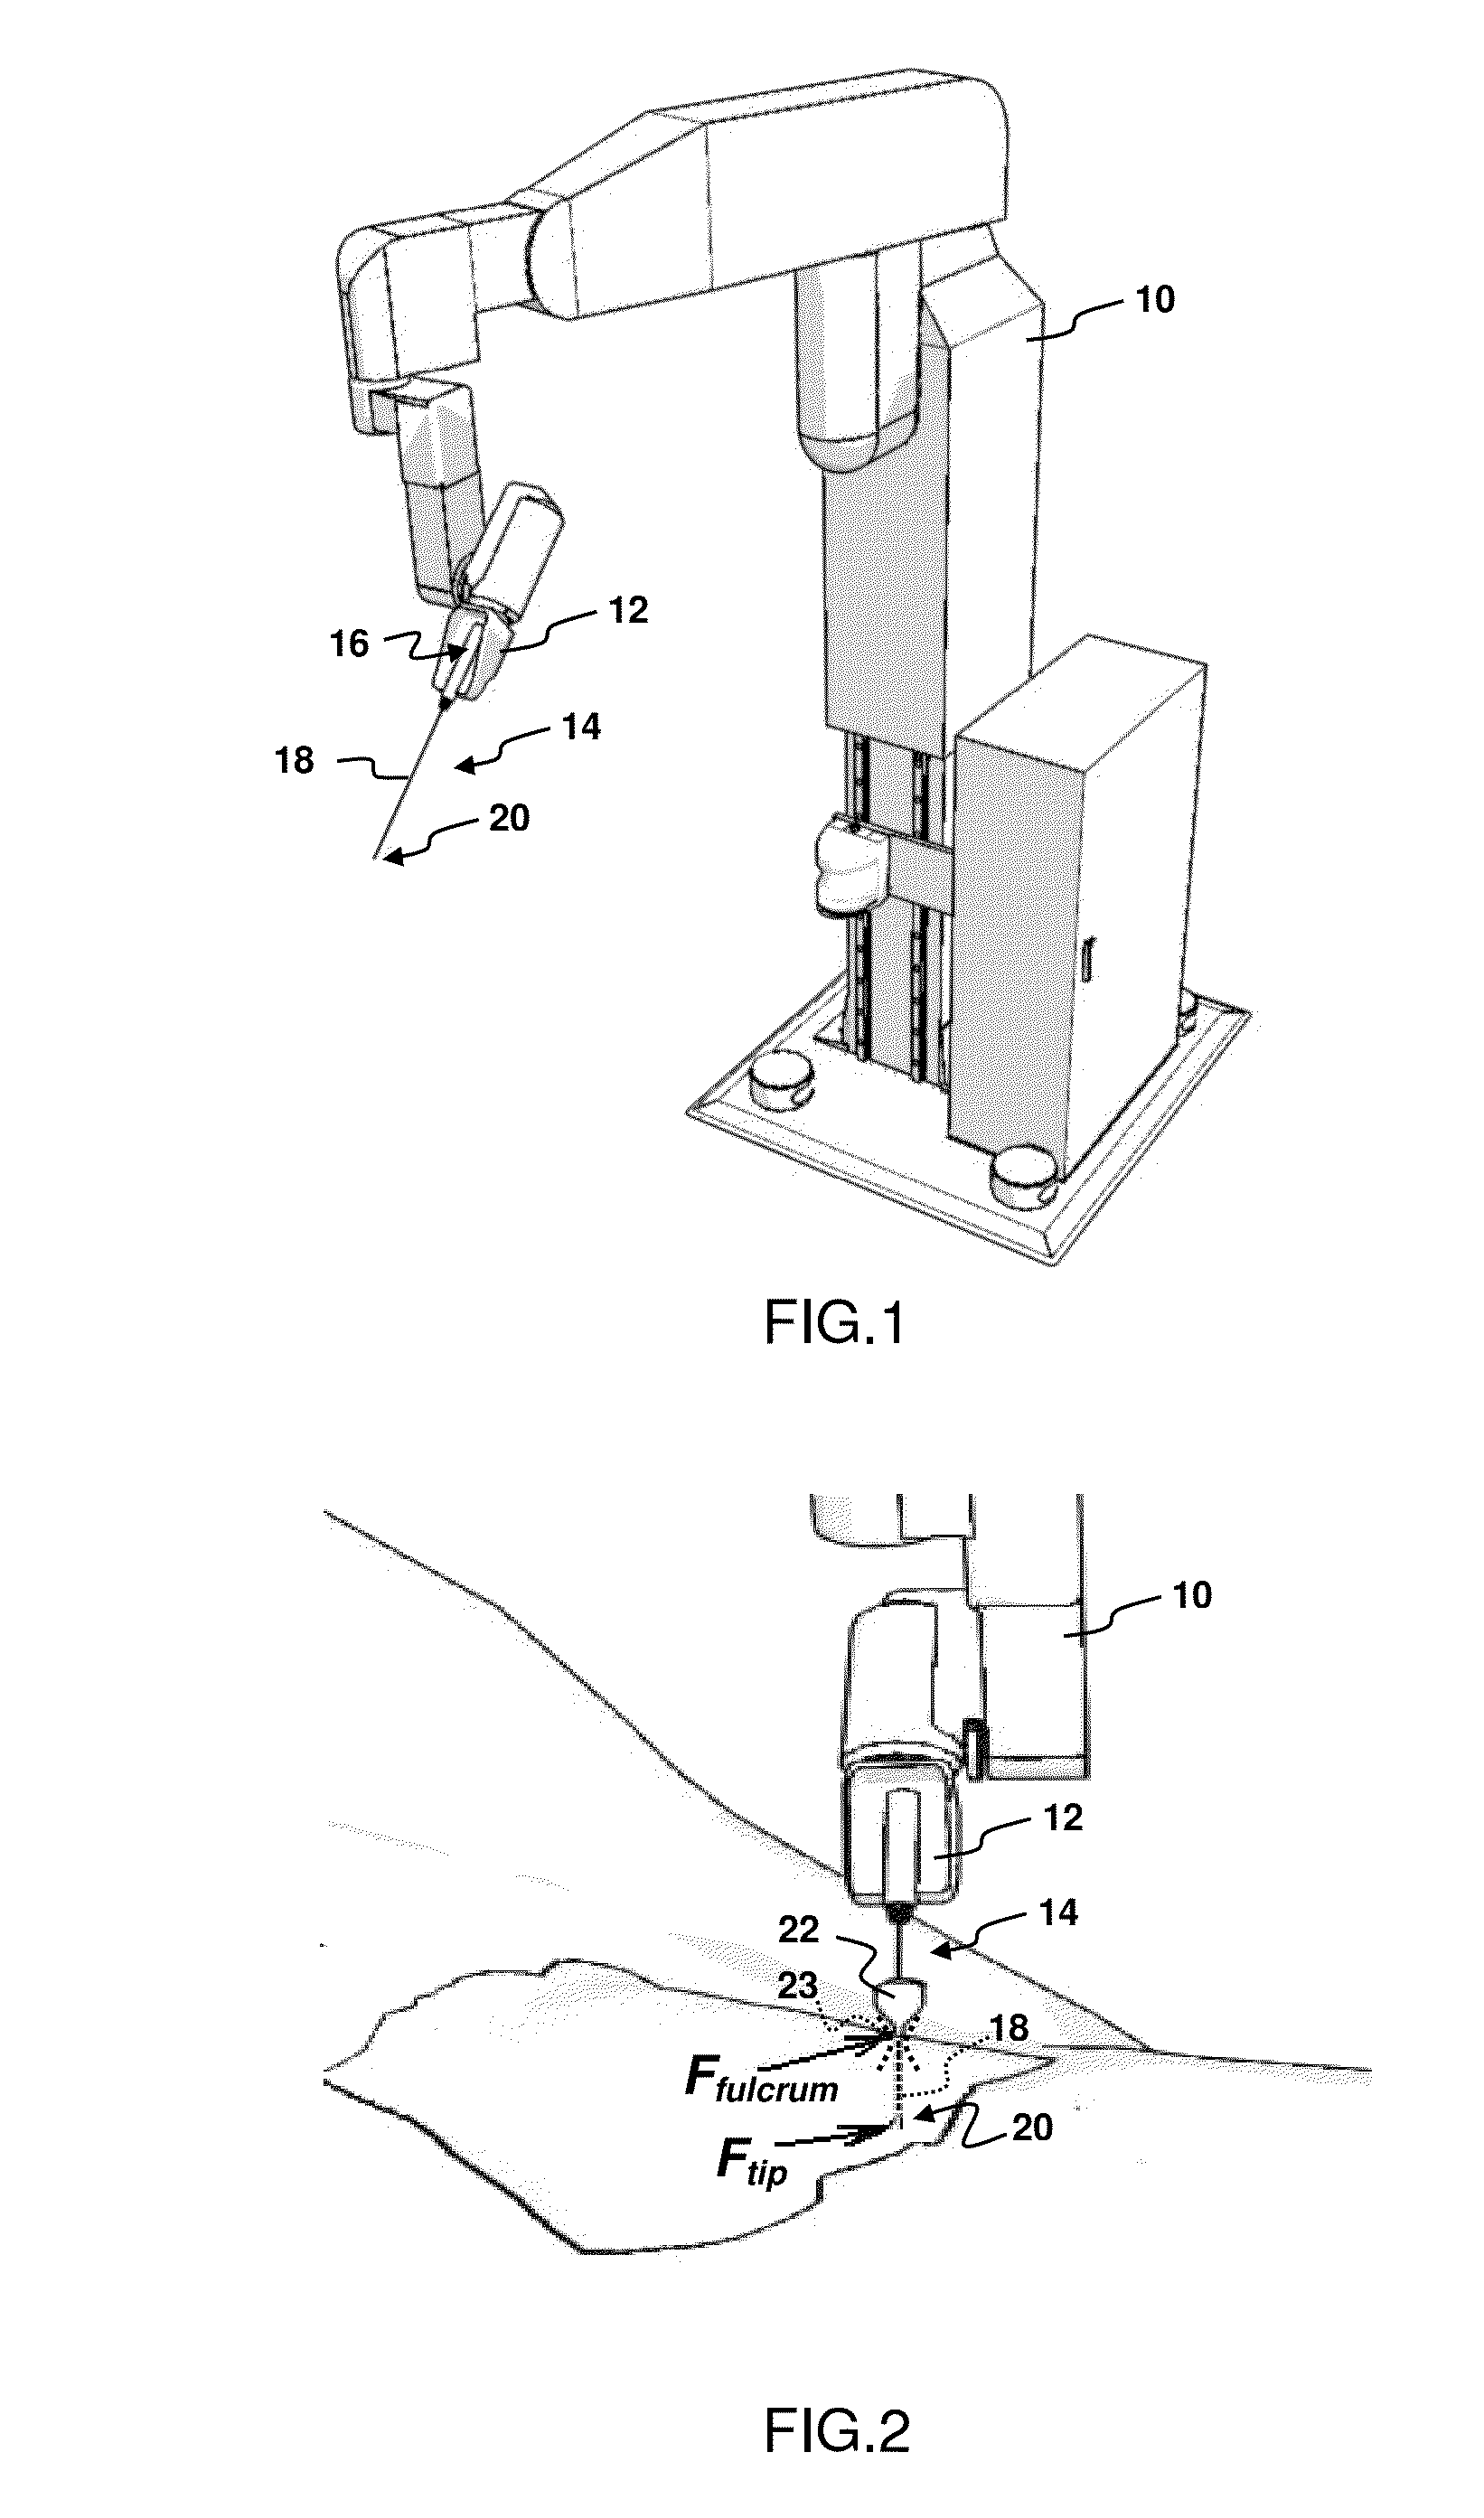 Force estimation for a minimally invasive robotic surgery system